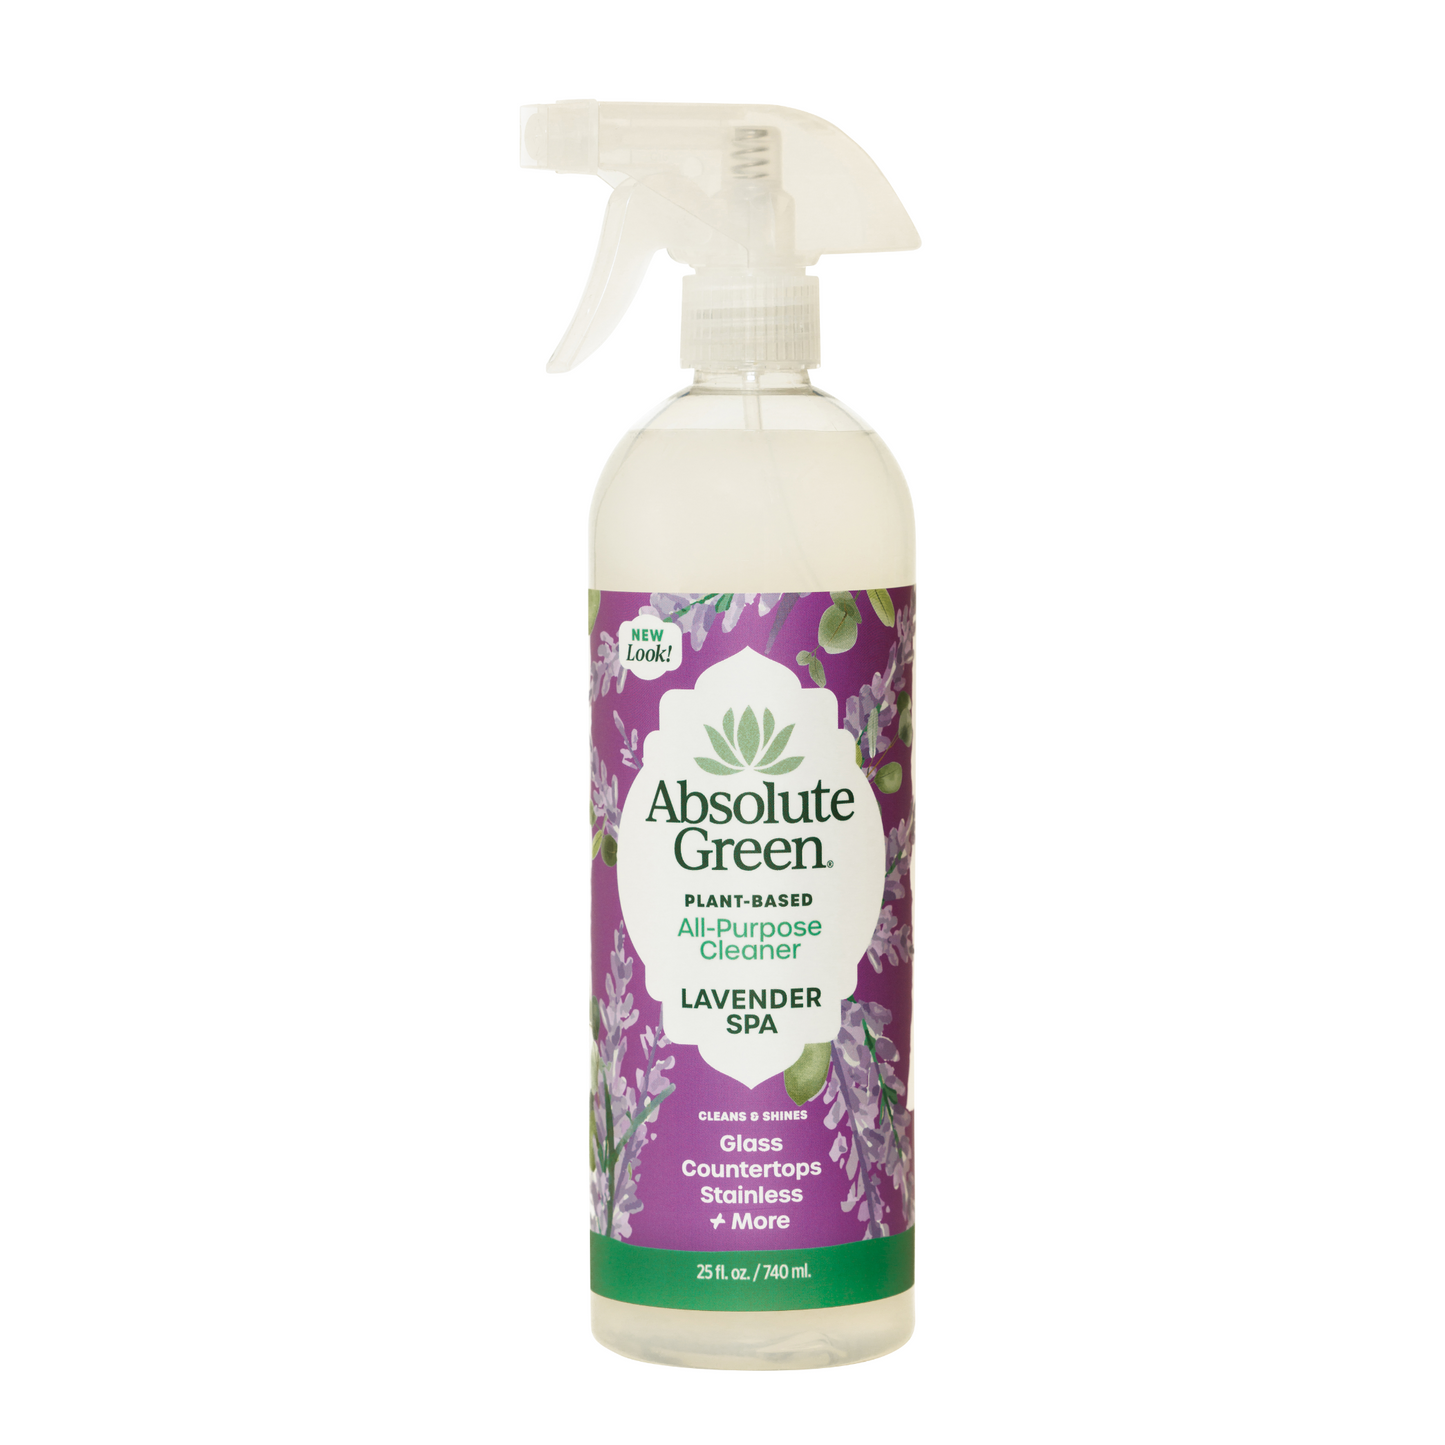 Absolute Green natural Lavender All-Purpose Cleaner is made from a blend of powerful, all natural plant-based cleaning ingredients along with 100% pure essential oils of Lavender, Tea Tree and Eucalyptus. 